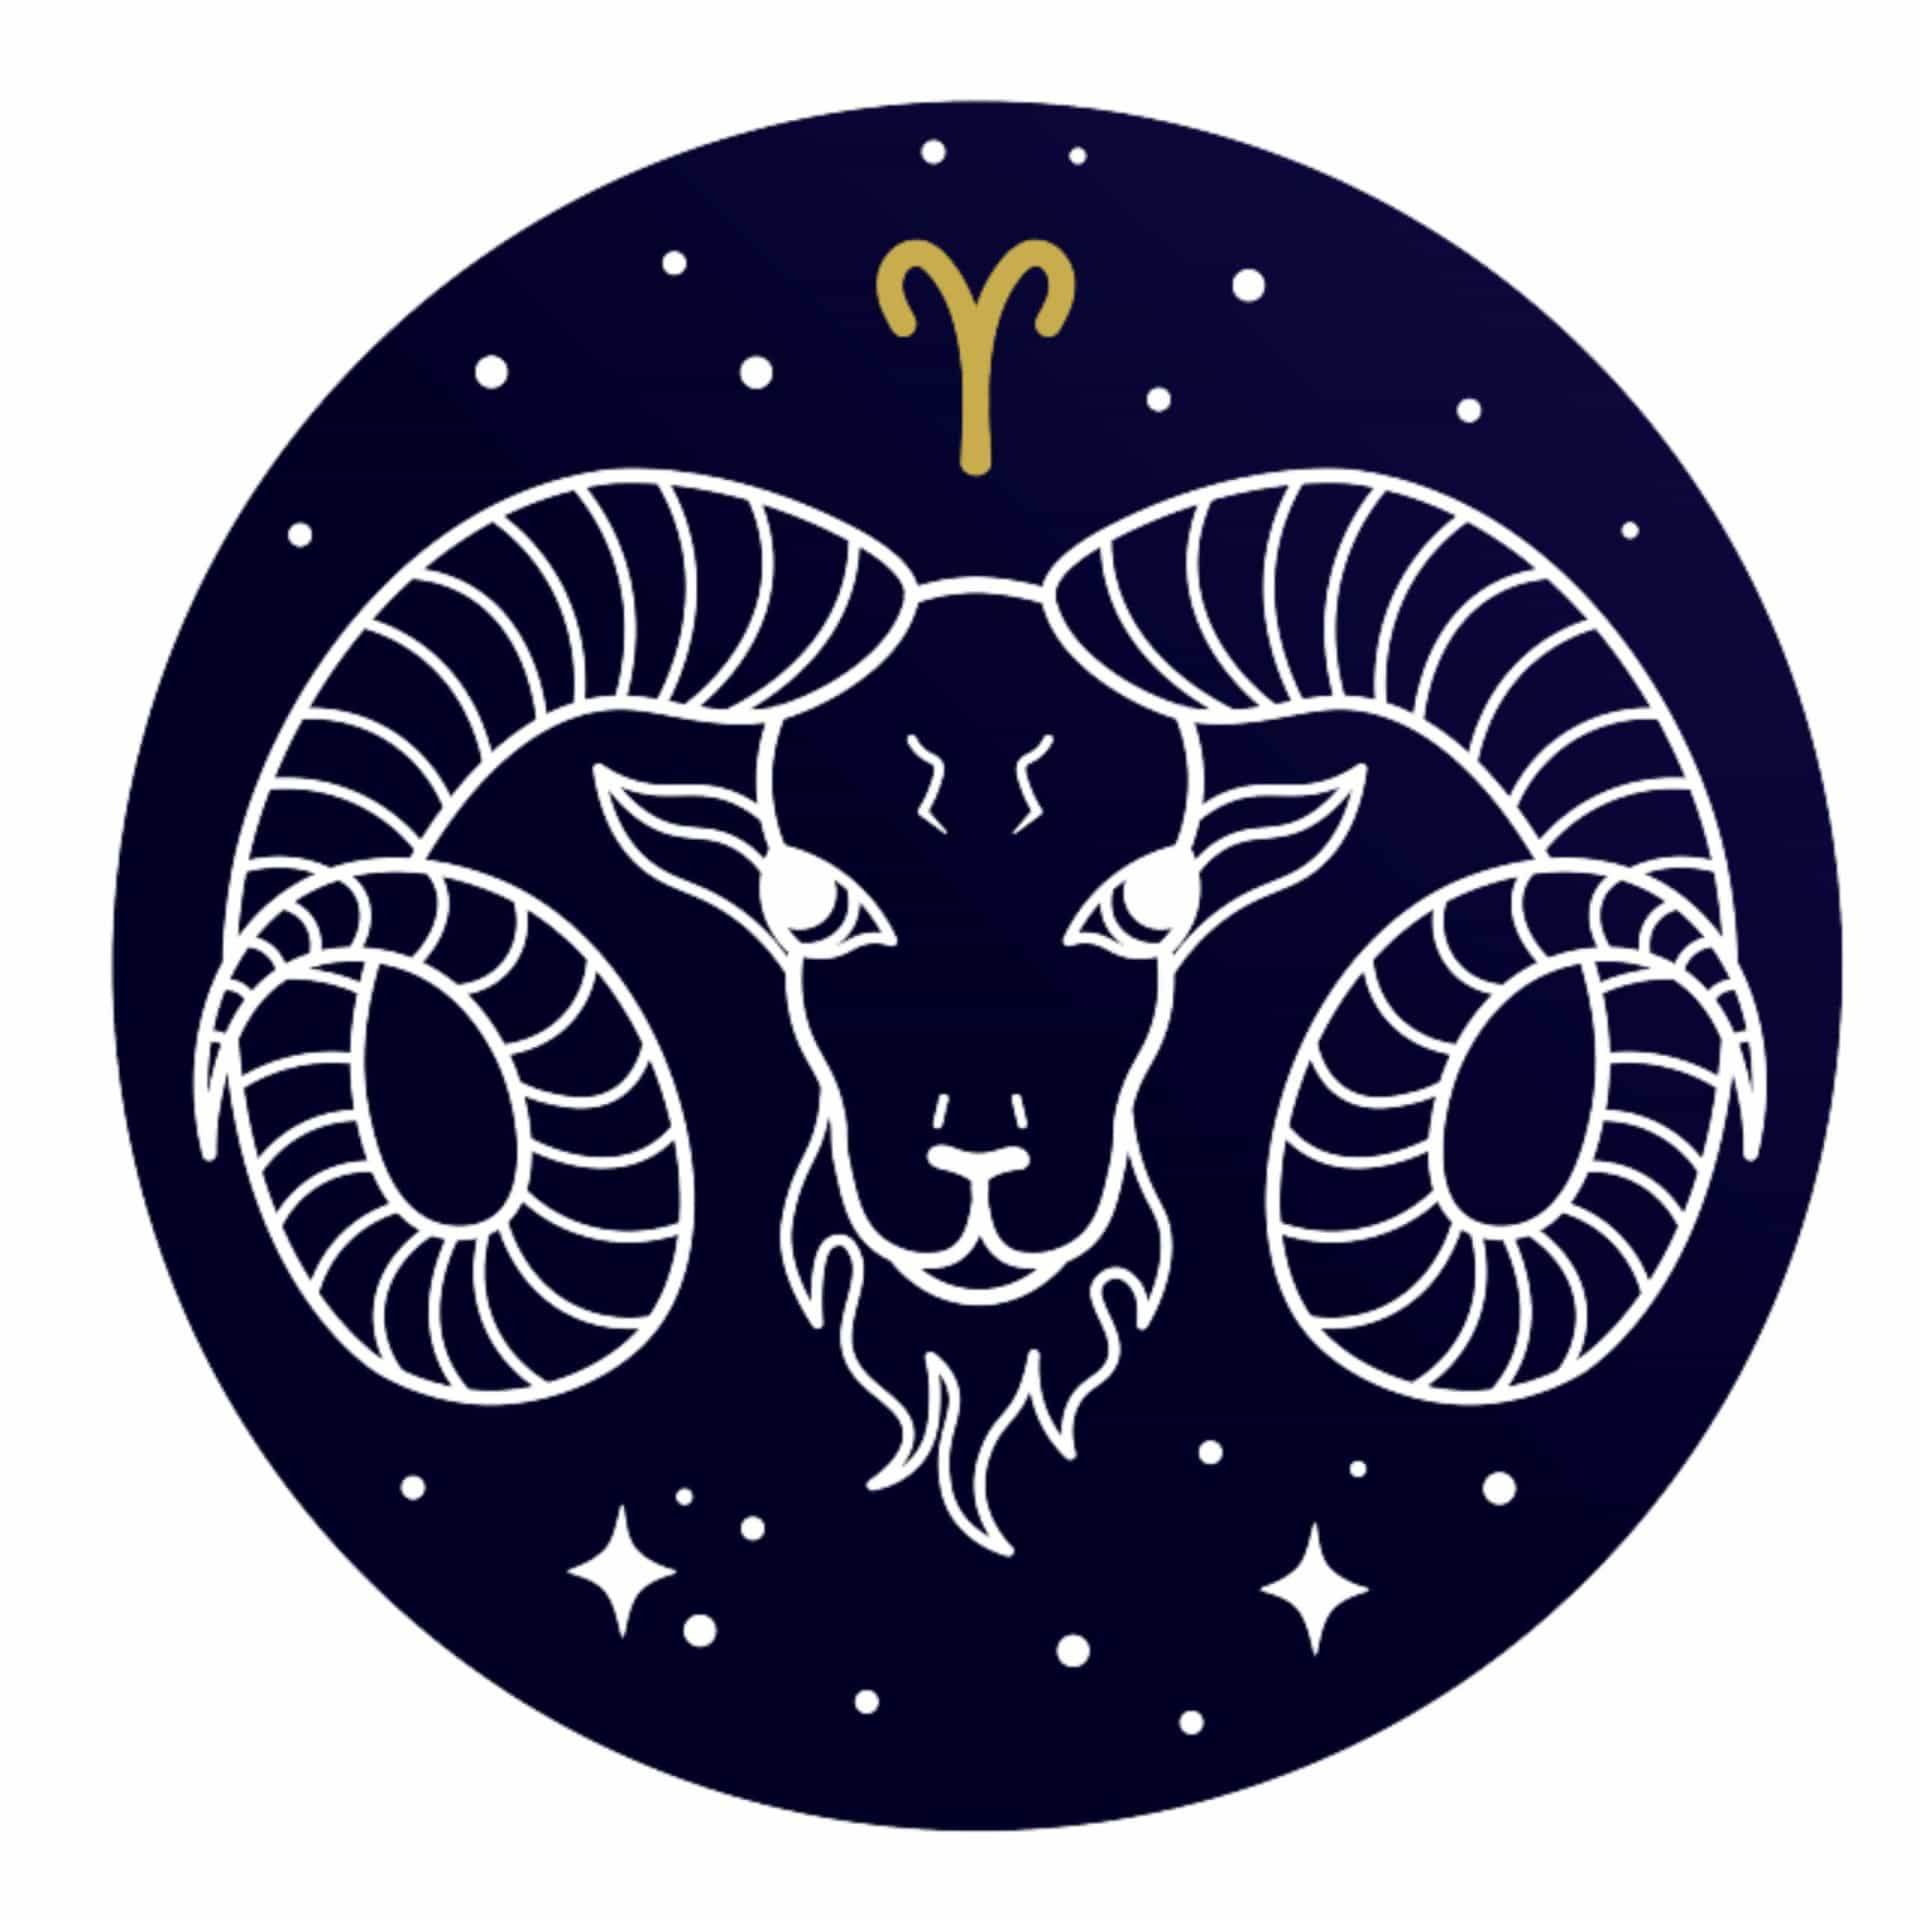 The best perfume for each zodiac sign